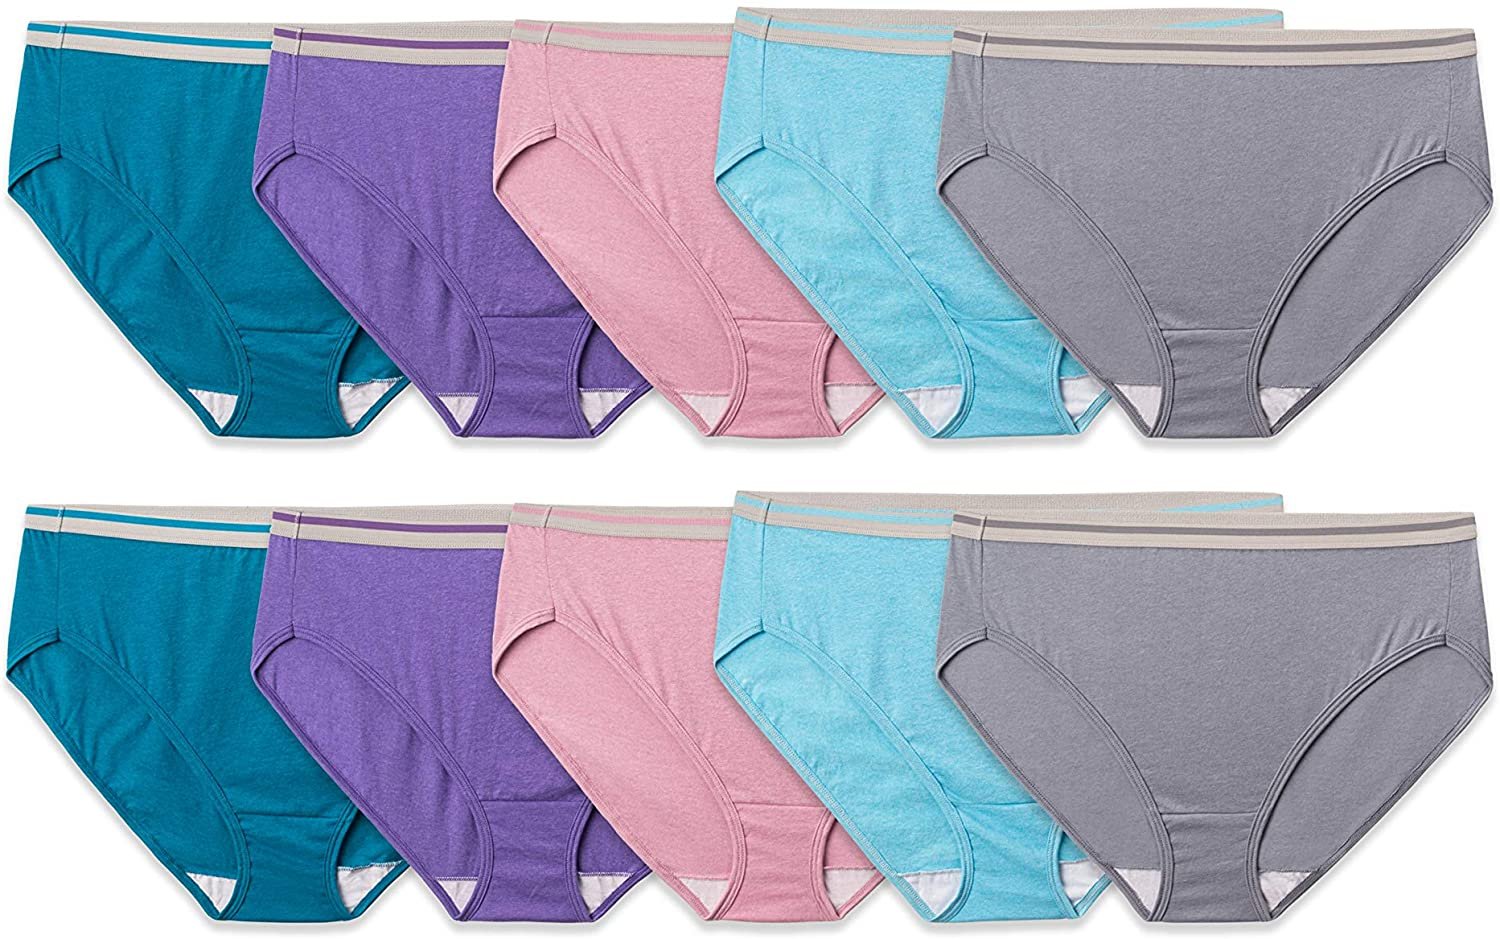 Fruit of the Loom Women's Tag Free Cotton Brief Panties (Regular & Plus  Size)